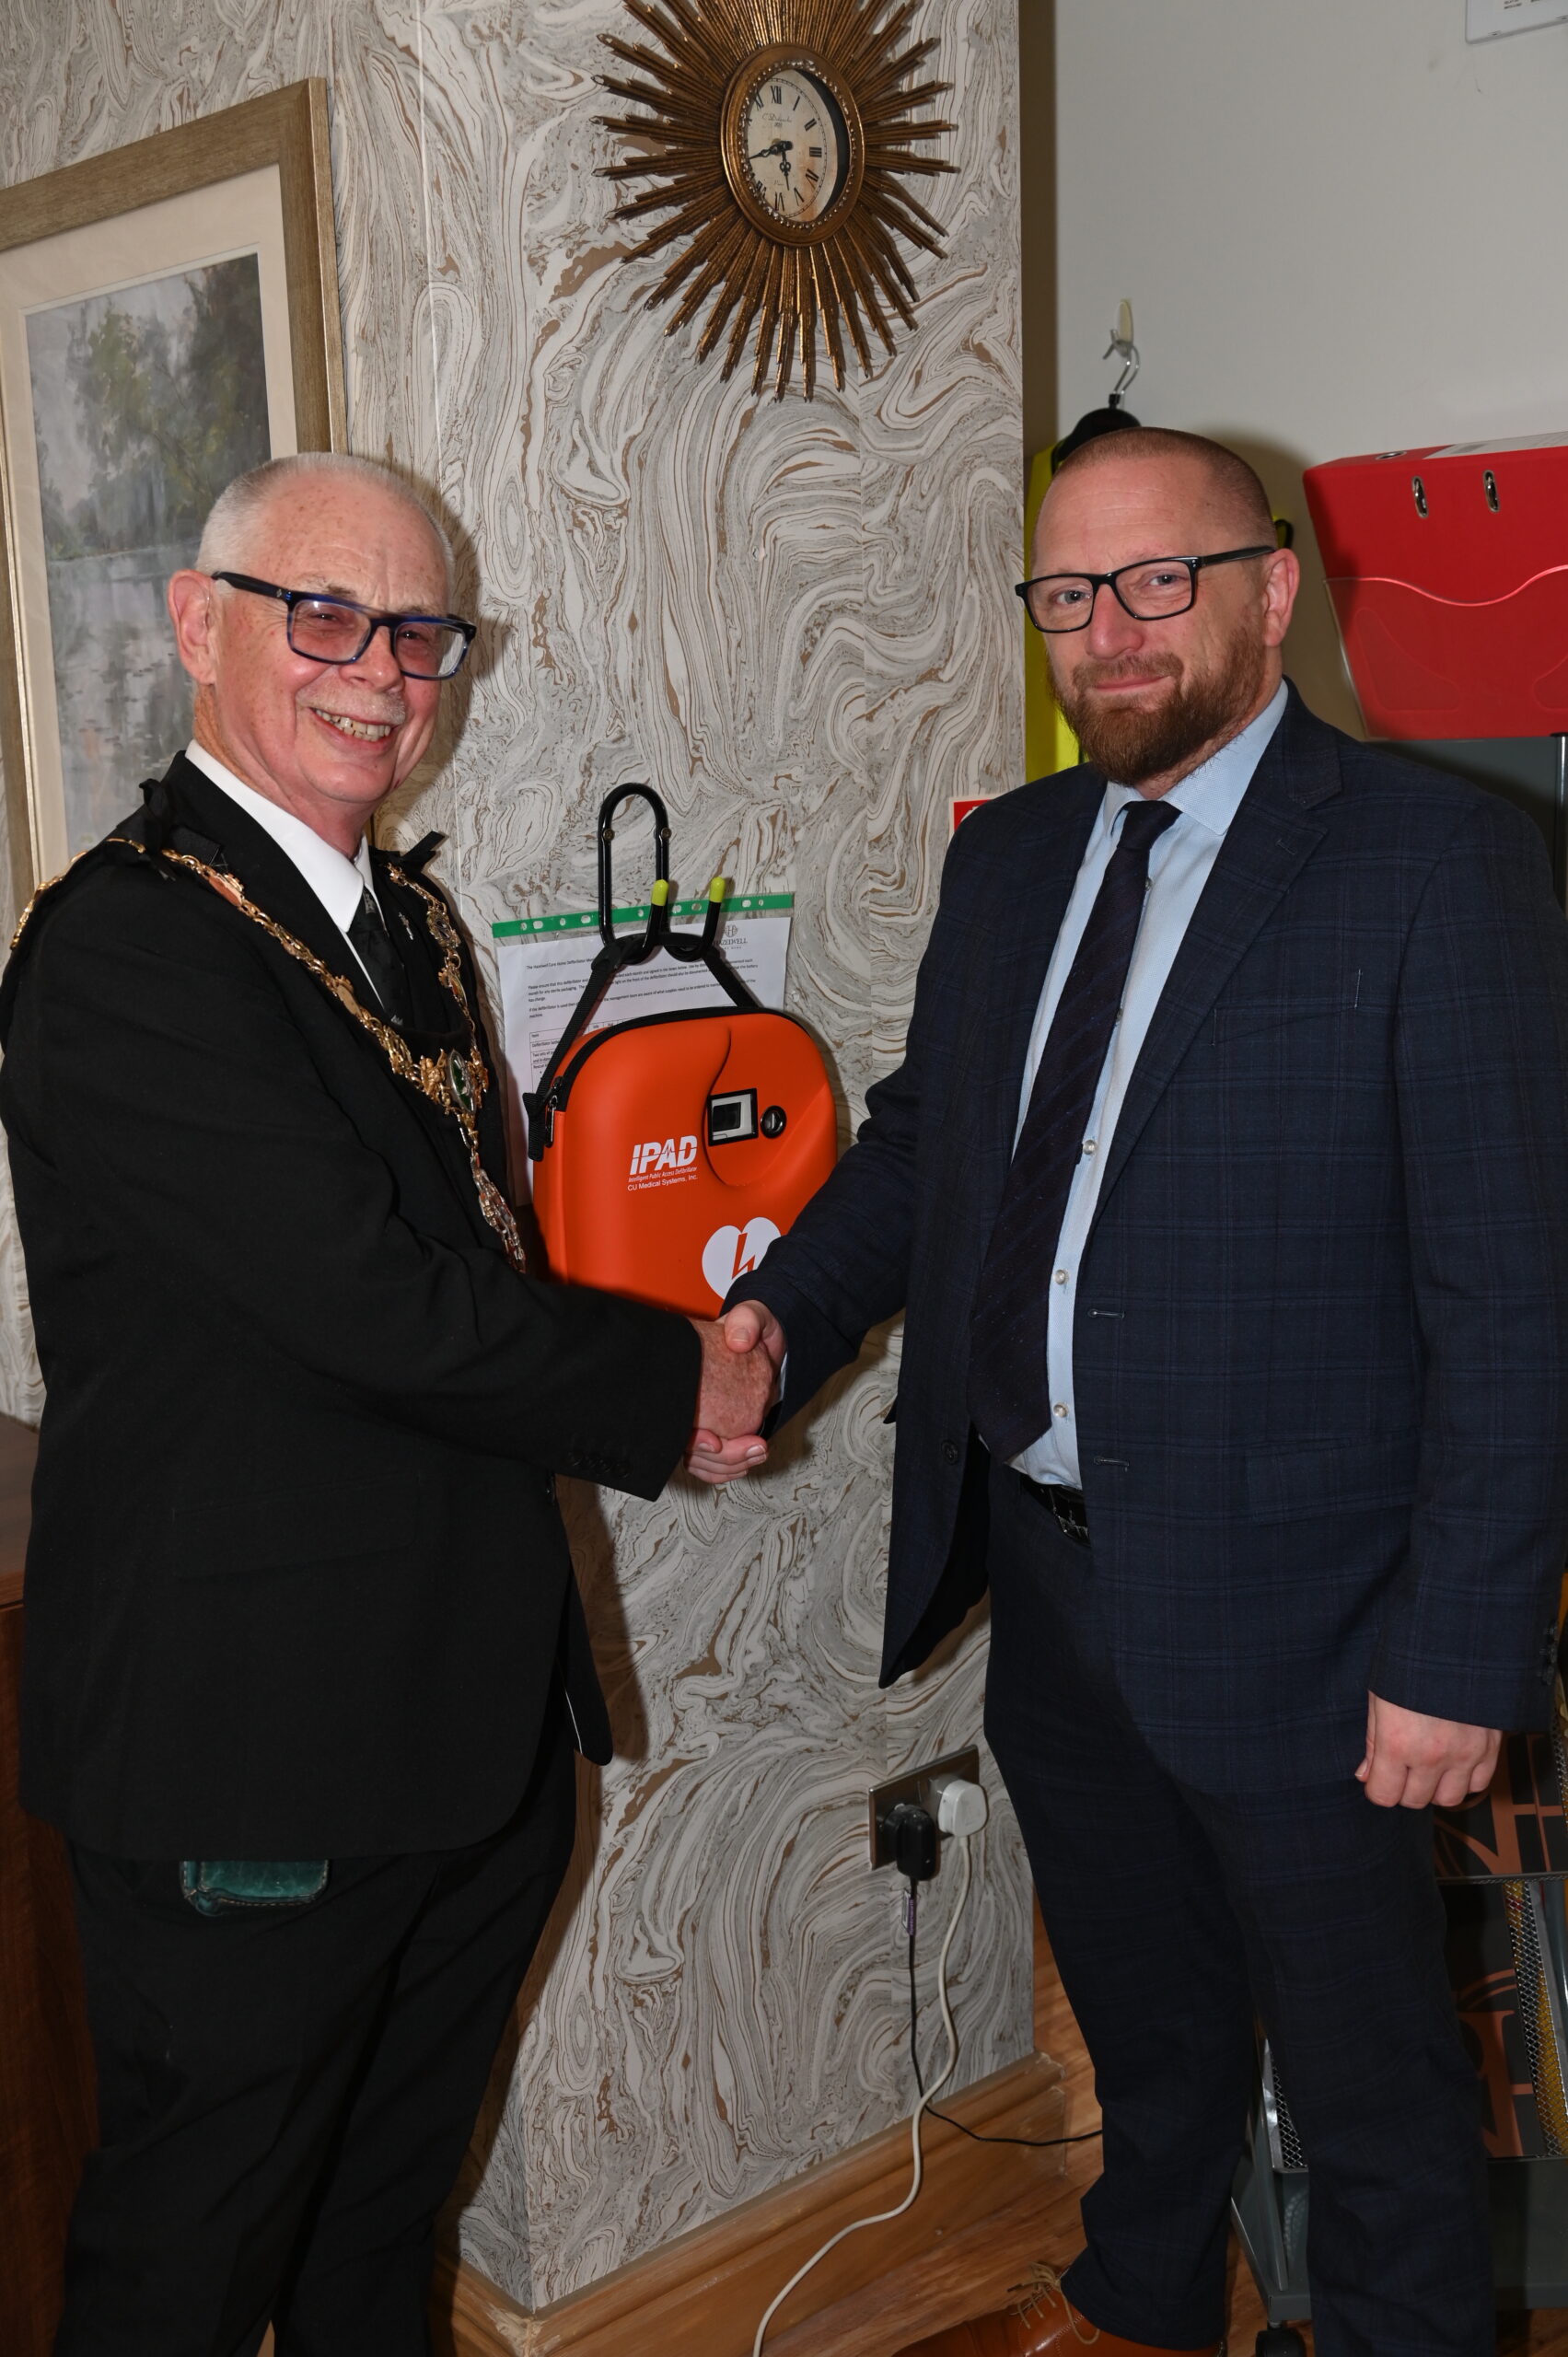 The mayor unveiling our new defibrillator at Hazelwell Care Home